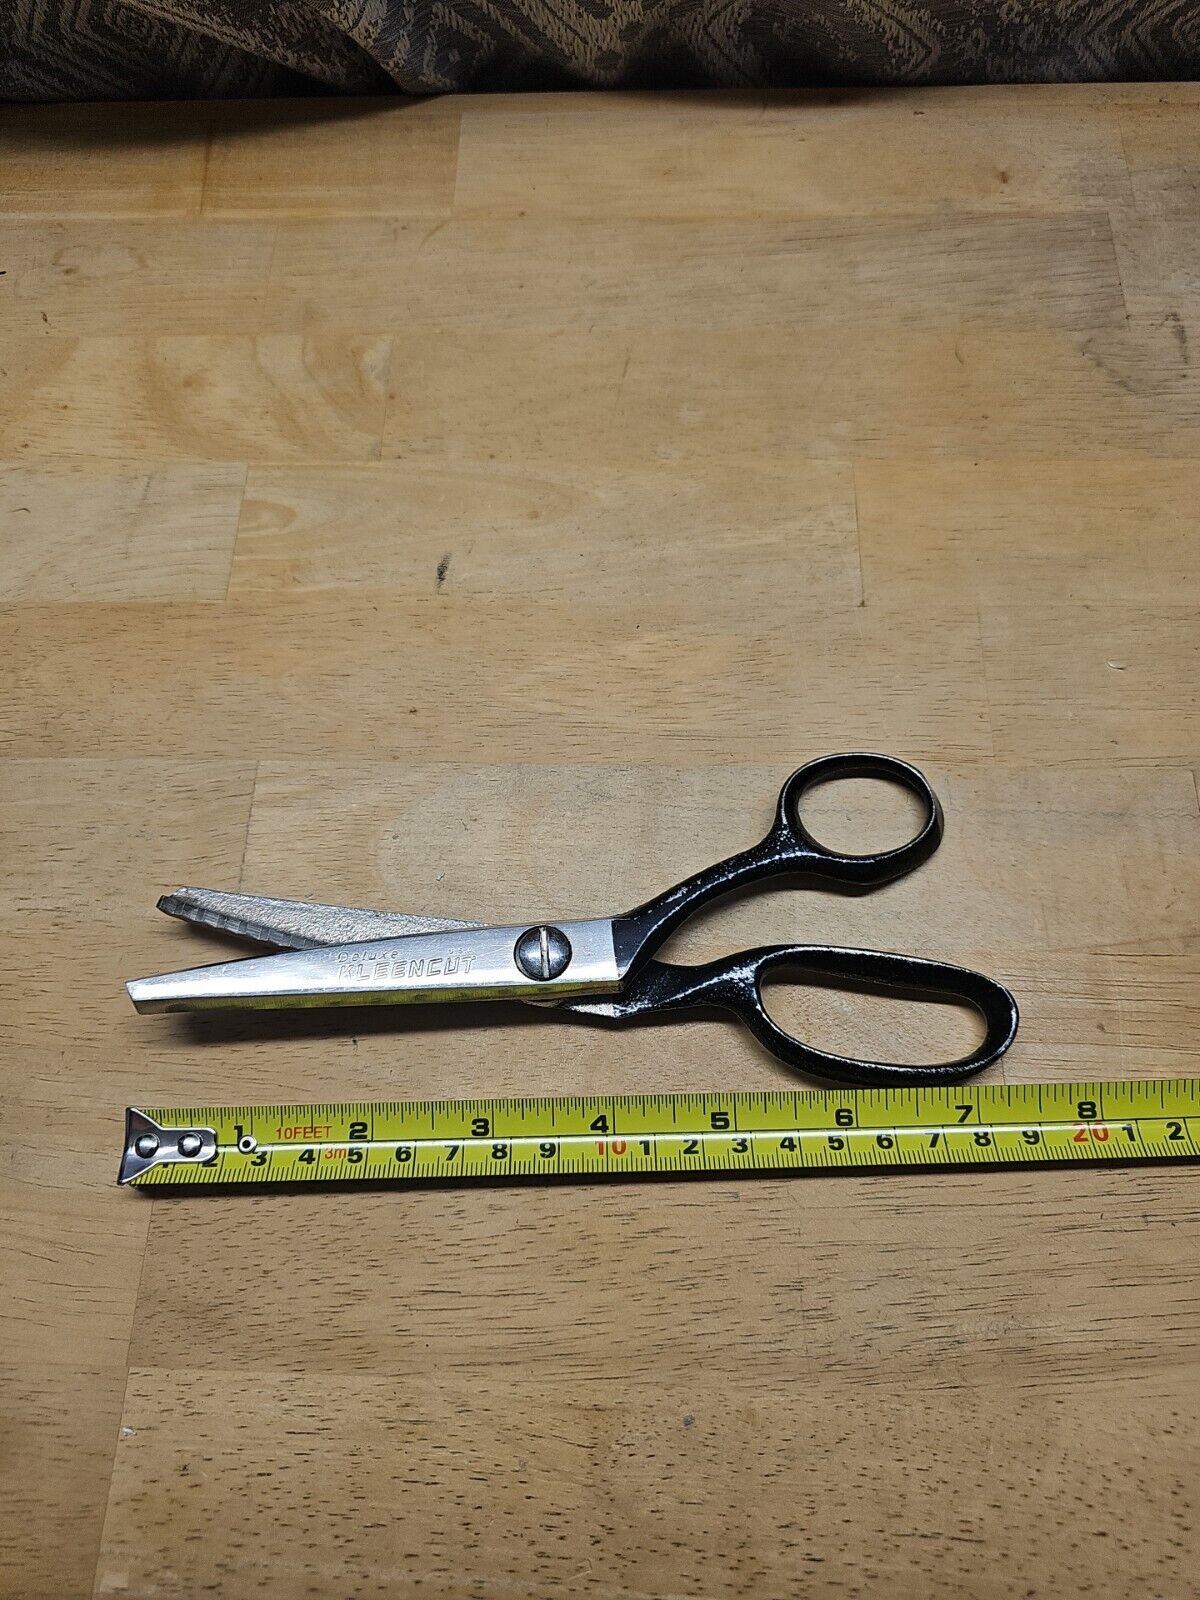 Vintage Deluxe Kleencut Pinking Shears 7.5 inches Scissors (AA7)